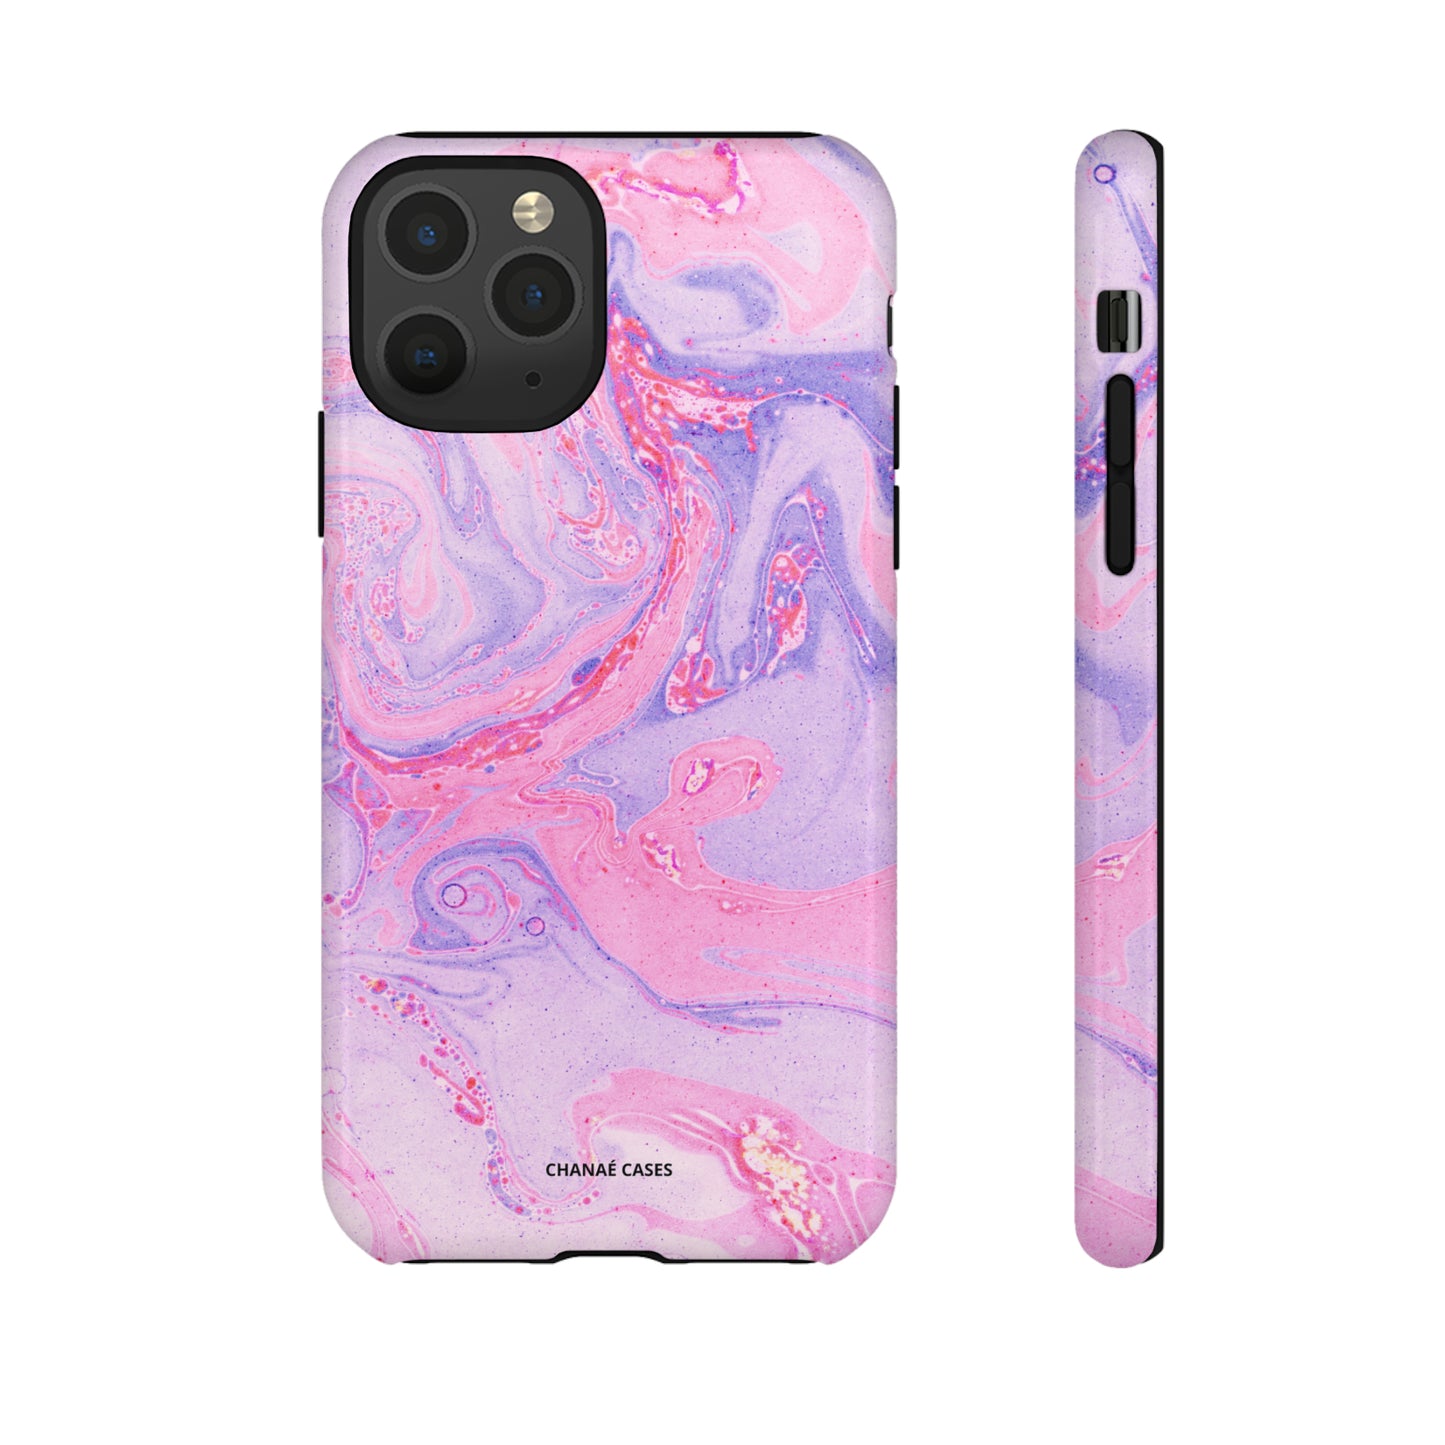 Emily Marble iPhone "Tough" Case